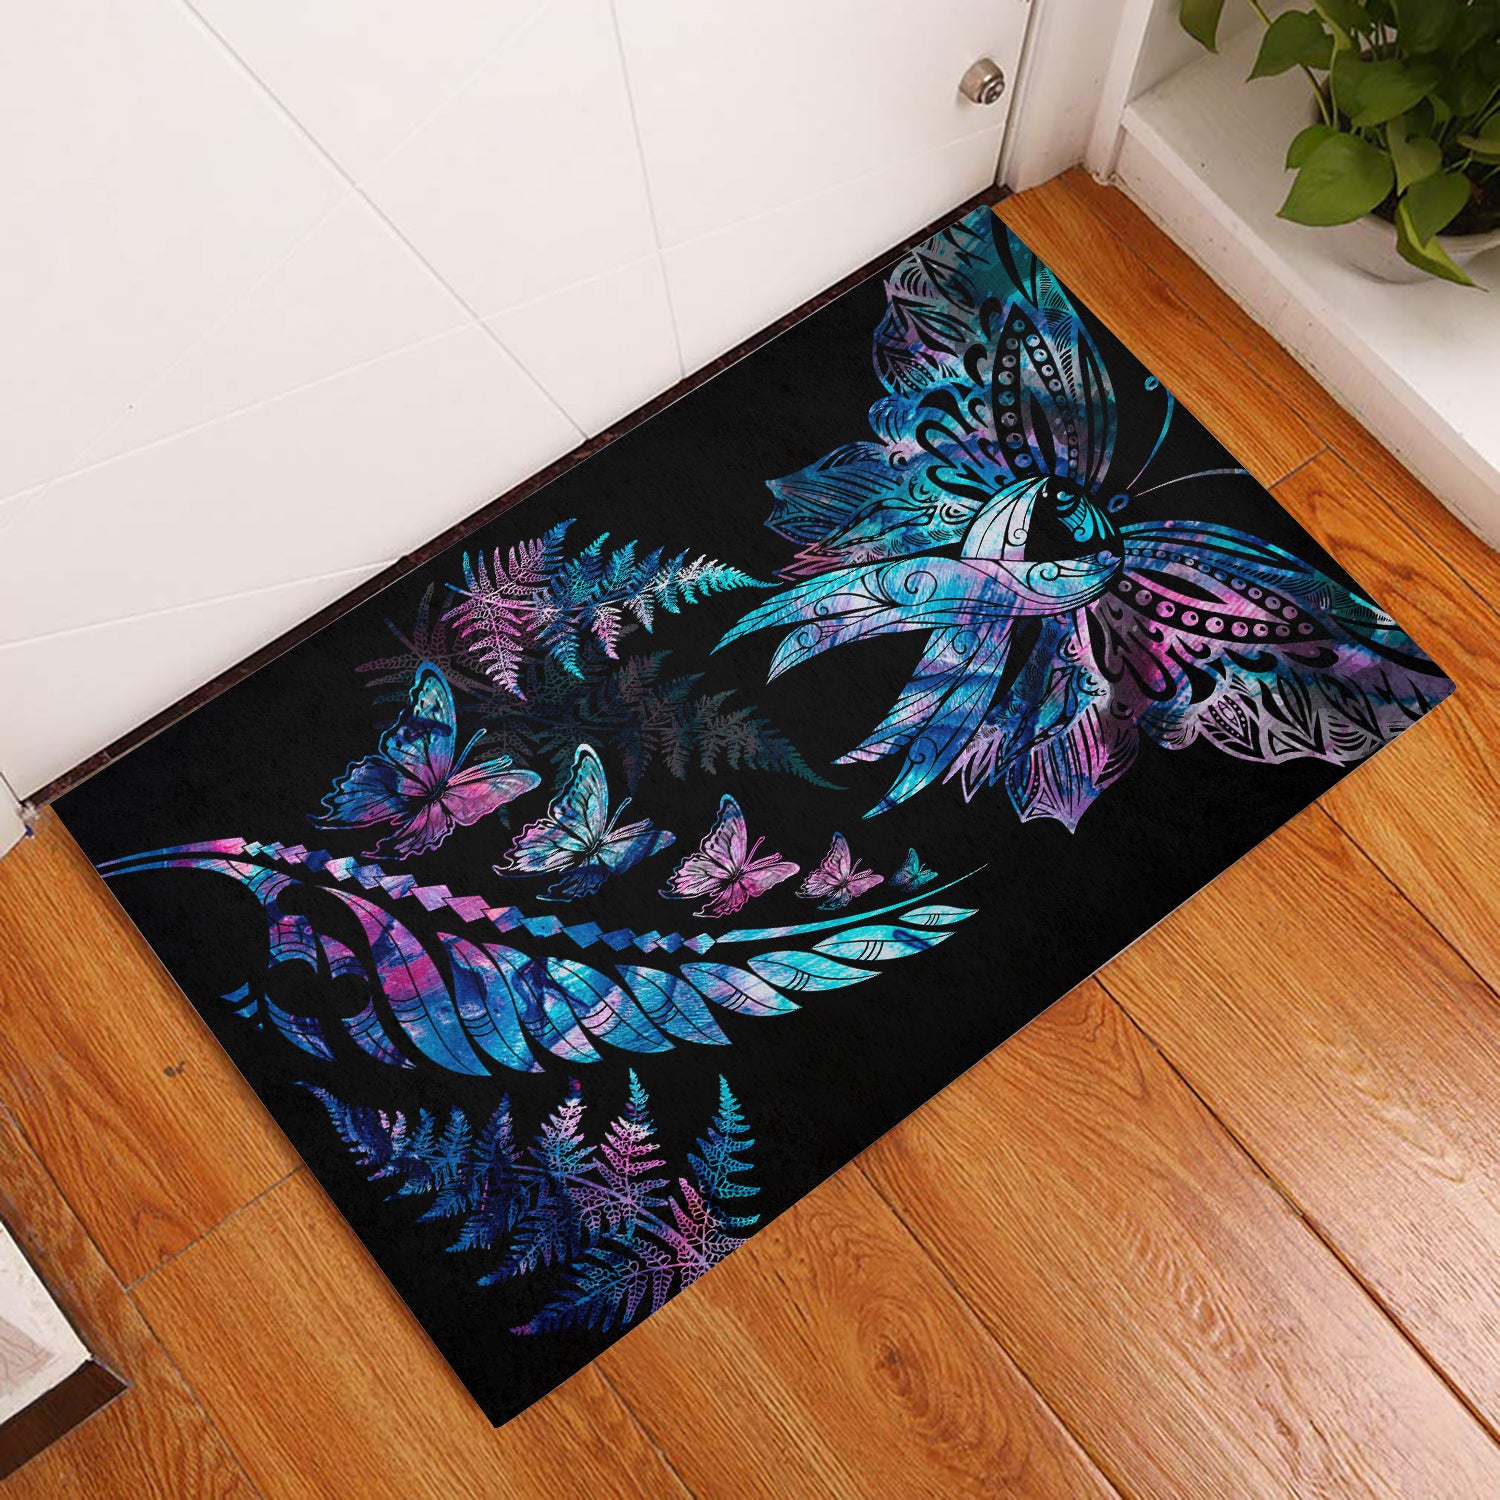 polynesia-ribbon-butterflies-door-mats-silver-fern-breast-cancer-with-papua-shell-pattern